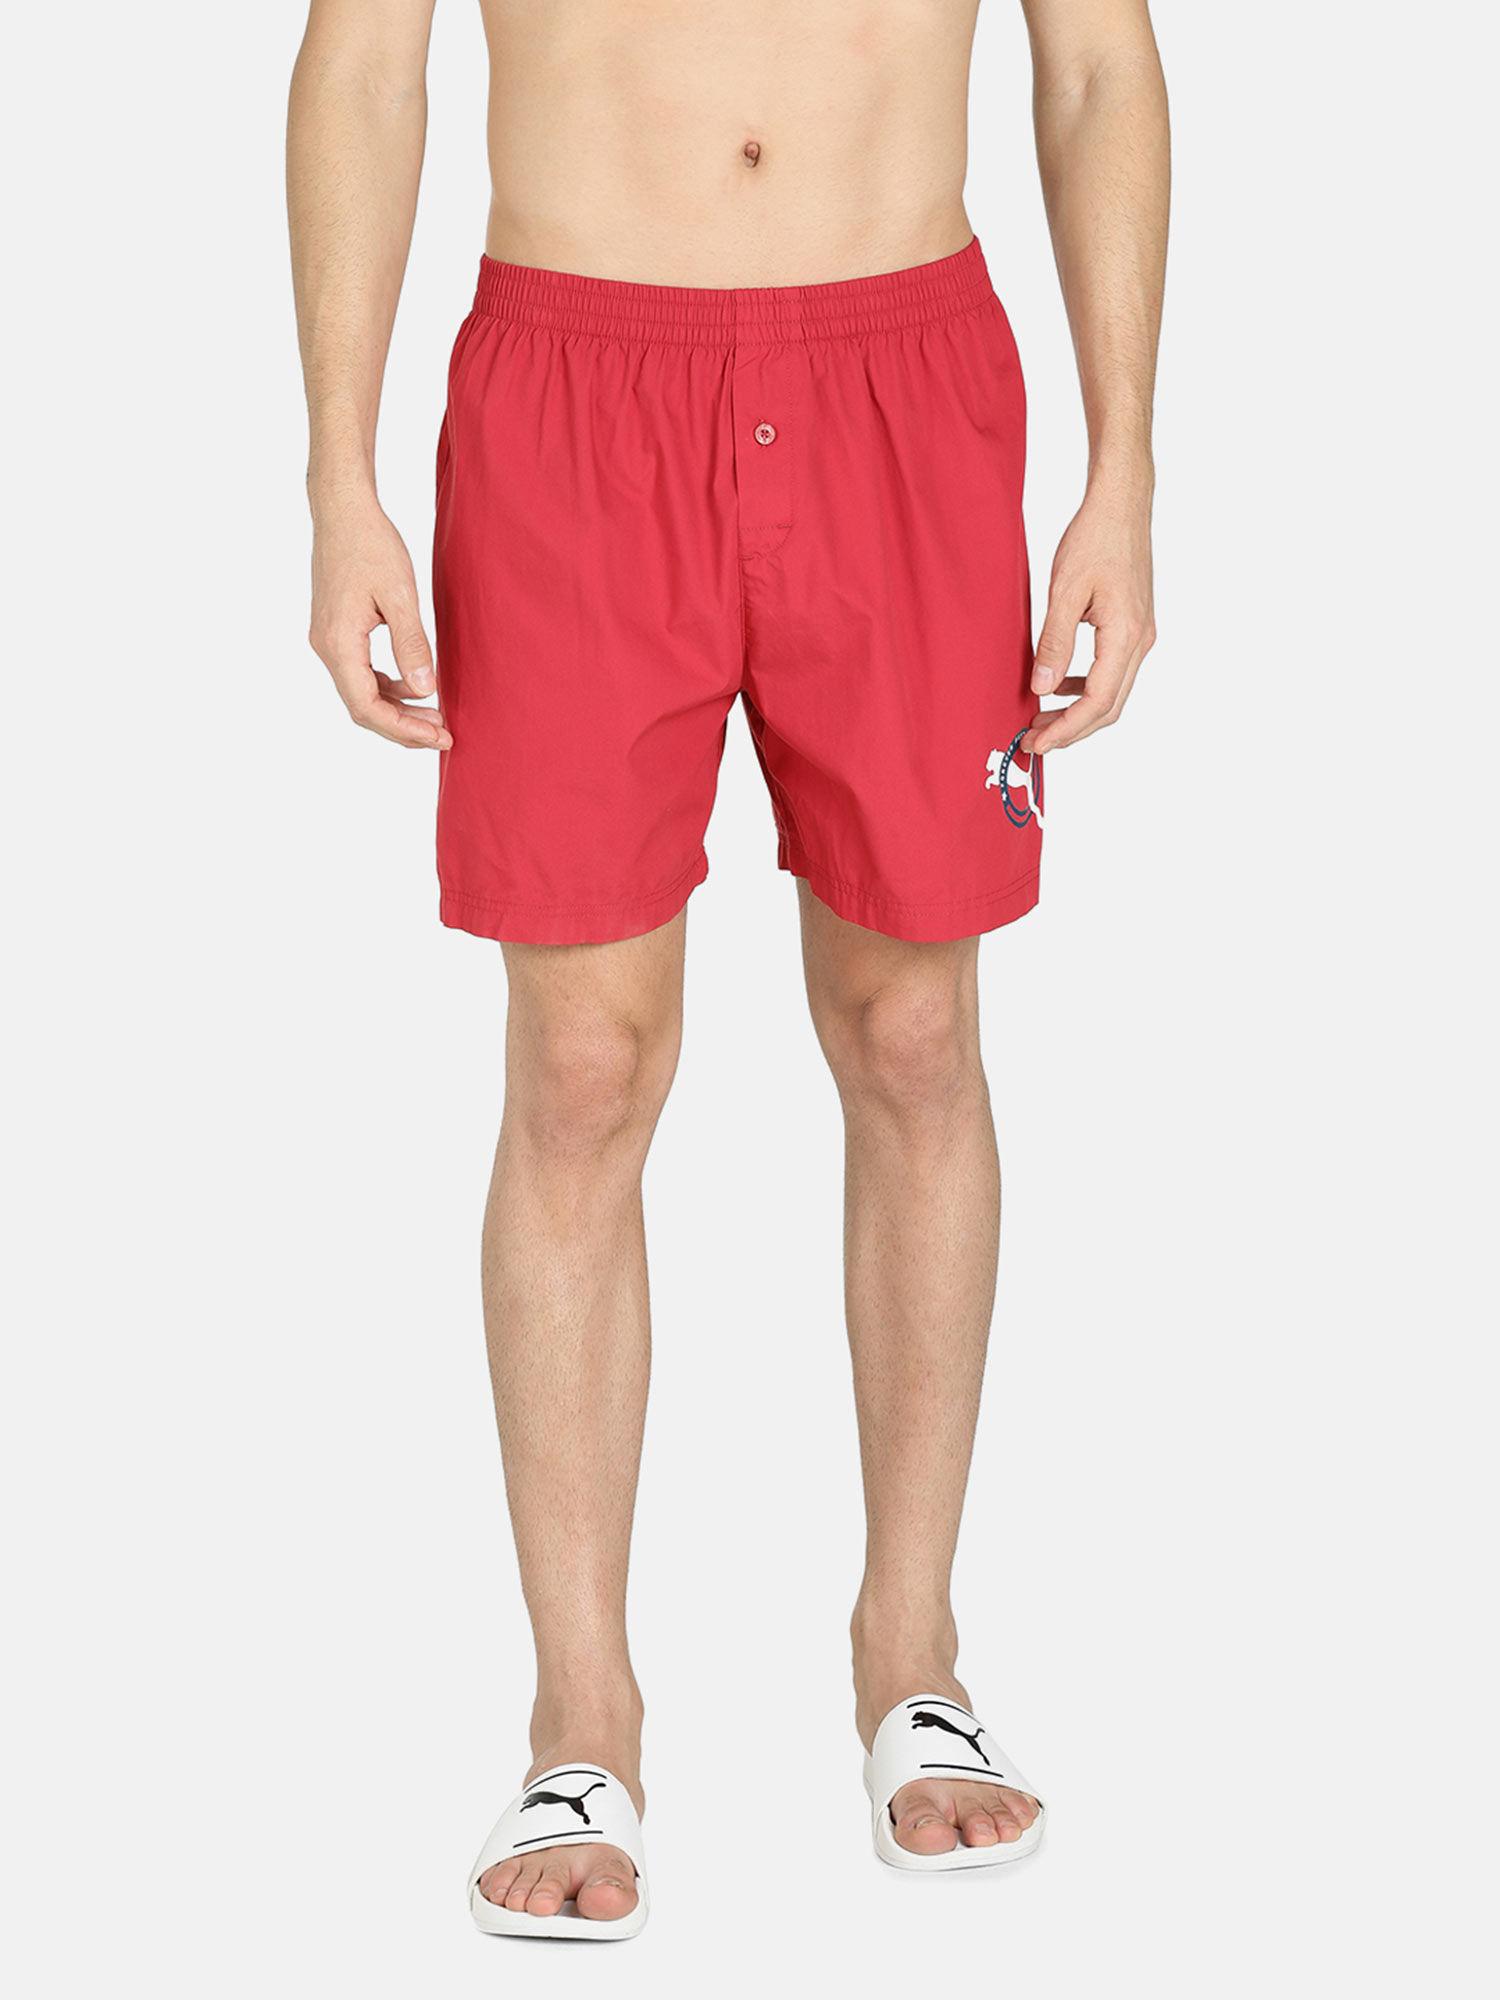 basic red woven boxer